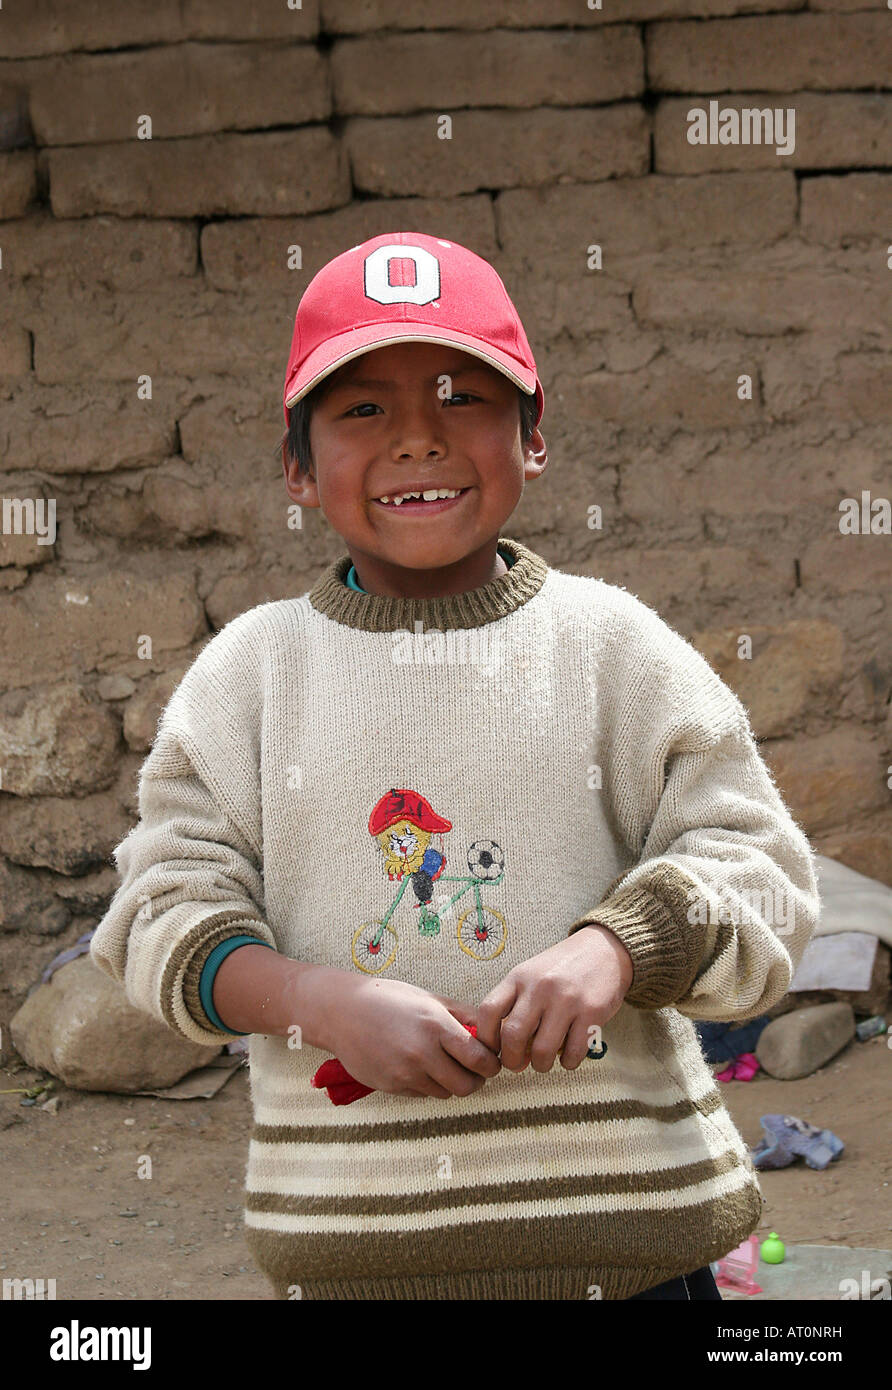 A portret of a young boy wearing a red cap in Llallagua, Potosi, Bolivia Stock Photo